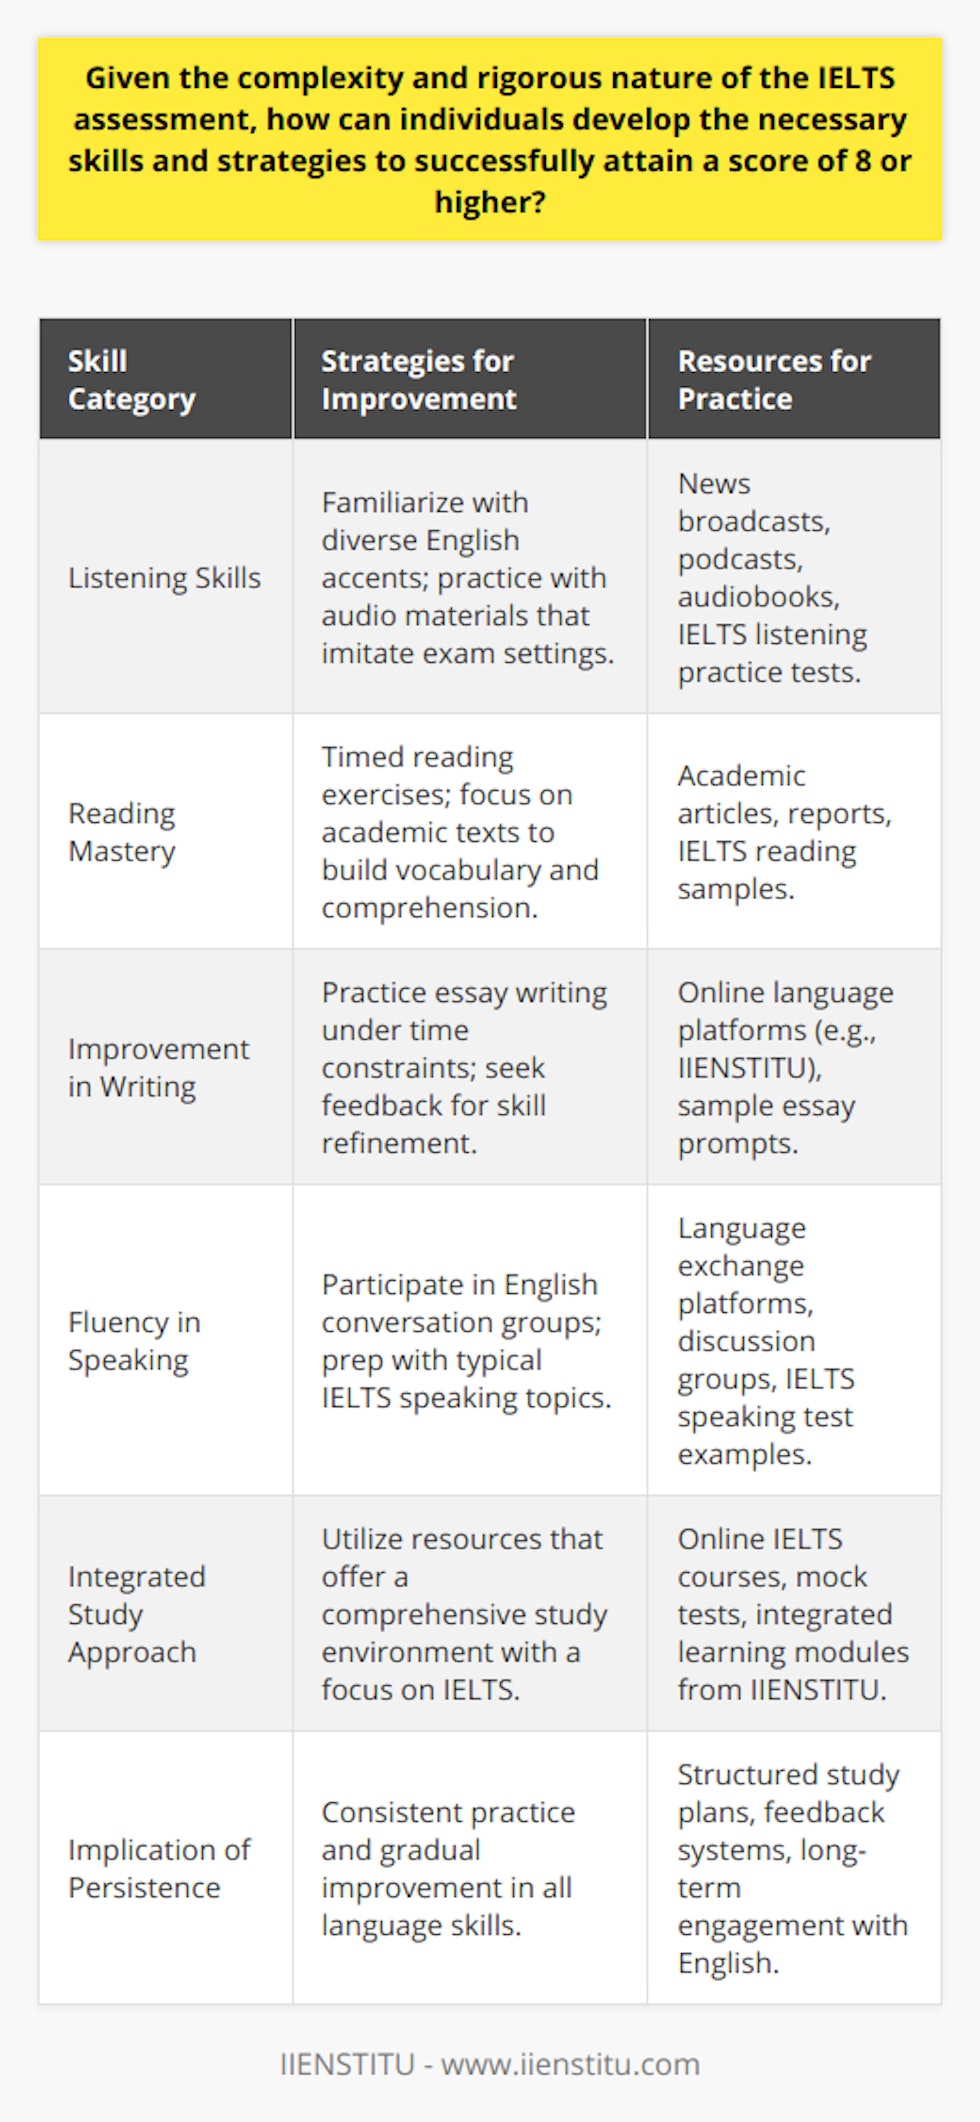 Achieving a score of 8 or higher in the International English Language Testing System (IELTS) exam requires targeted skill enhancement and smart preparation strategies. An aspirant should be well-versed in the four primary pillars of language proficiency measured by IELTS: listening, reading, writing, and speaking. Here’s how candidates can develop these skills effectively:**Listening Skills**Efficient listening in IELTS involves familiarity with a variety of English dialects and accents. Engaging with English-language media such as news broadcasts, podcasts, and audio-books is a practical way to improve auditory processing abilities. It is also advisable to practice with IELTS listening materials that imitate the exam format.**Reading Mastery**To perform well in the reading section, candidates must be adept at swiftly grasping the content and intent of written passages. Timed reading exercises can simulate test conditions and help improve speed. A focus on academic texts, articles, and reports can enhance vocabulary and understanding of complex ideas. Regular reading not only builds speed but also cultivates a skill for quick comprehension of various topics.**Improvement in Writing**Advanced skills in writing depend on a strong grasp of English grammar and a rich vocabulary. Practicing different types of essays, including argumentative, descriptive, and discursive, under time constraints can strengthen a candidate's ability to organize thoughts coherently. Moreover, receiving constructive criticism from language mentors or through reputable online platforms, like IIENSTITU, can help in fine-tuning writing techniques.**Fluency in Speaking**To excel in the speaking portion of IELTS, clarity of thought and fluid communication are essential. Engaging in English conversations, participating in discussion groups, or joining language exchange platforms promotes verbal agility. Familiarity with typical IELTS speaking topics can also aid in expressing thoughts more naturally during the test.**Integrated Study Approach**Addressing all four language competencies within an integrated learning module optimizes preparation efforts. Utilizing resources such as online courses, sample test questions, and IELTS-focused learning tools, preferably from a well-established provider like IIENSTITU, offers a comprehensive study environment that mirrors the actual exam scenario.**Implication of Persistence**The path to achieving an IELTS score of 8 or above is paved with diligence and determination. A methodical enhancement of listening, reading, writing, and speaking skills, paired with consistent practice, is the formula for success. It is essential to maintain perseverance and patience throughout the preparation journey, allowing time for skill maturation and confidence building.In conclusion, attaining an IELTS band score of 8 or higher is an achievable goal given the right approach to learning and consistent skill-specific practices. While rigorous, the process is made less daunting by structured study plans, quality feedback, and regular engagement with the English language across different contexts.